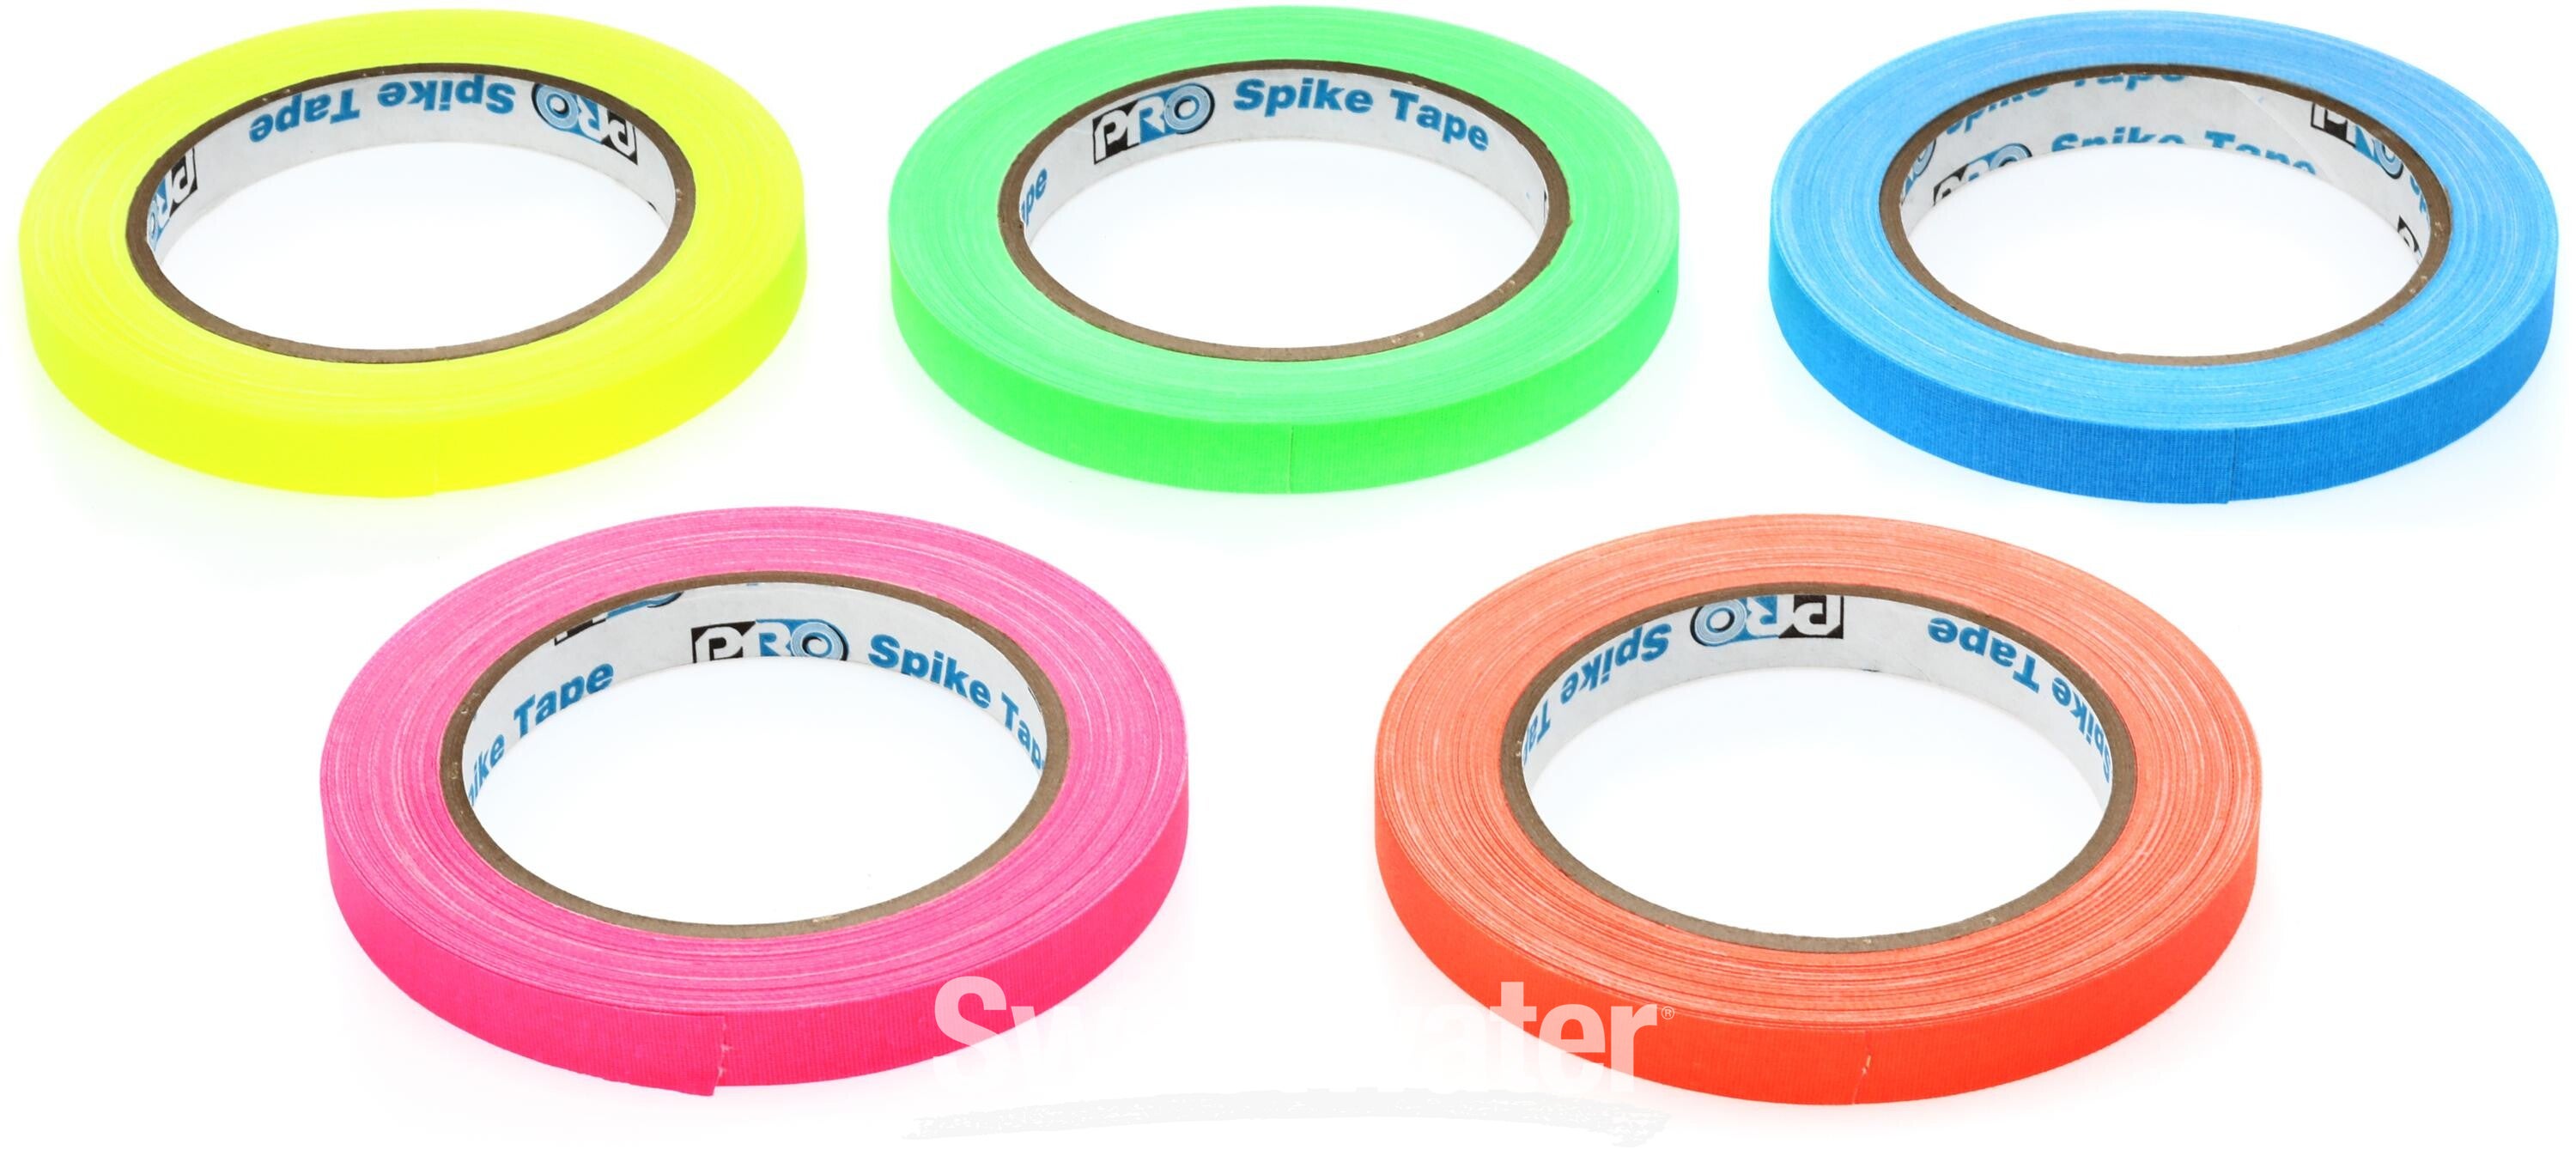 Pro Tapes Pro Spike Stack 1/2-inch Gaffers Tape - Fluorescent Assortment  (5-pack)